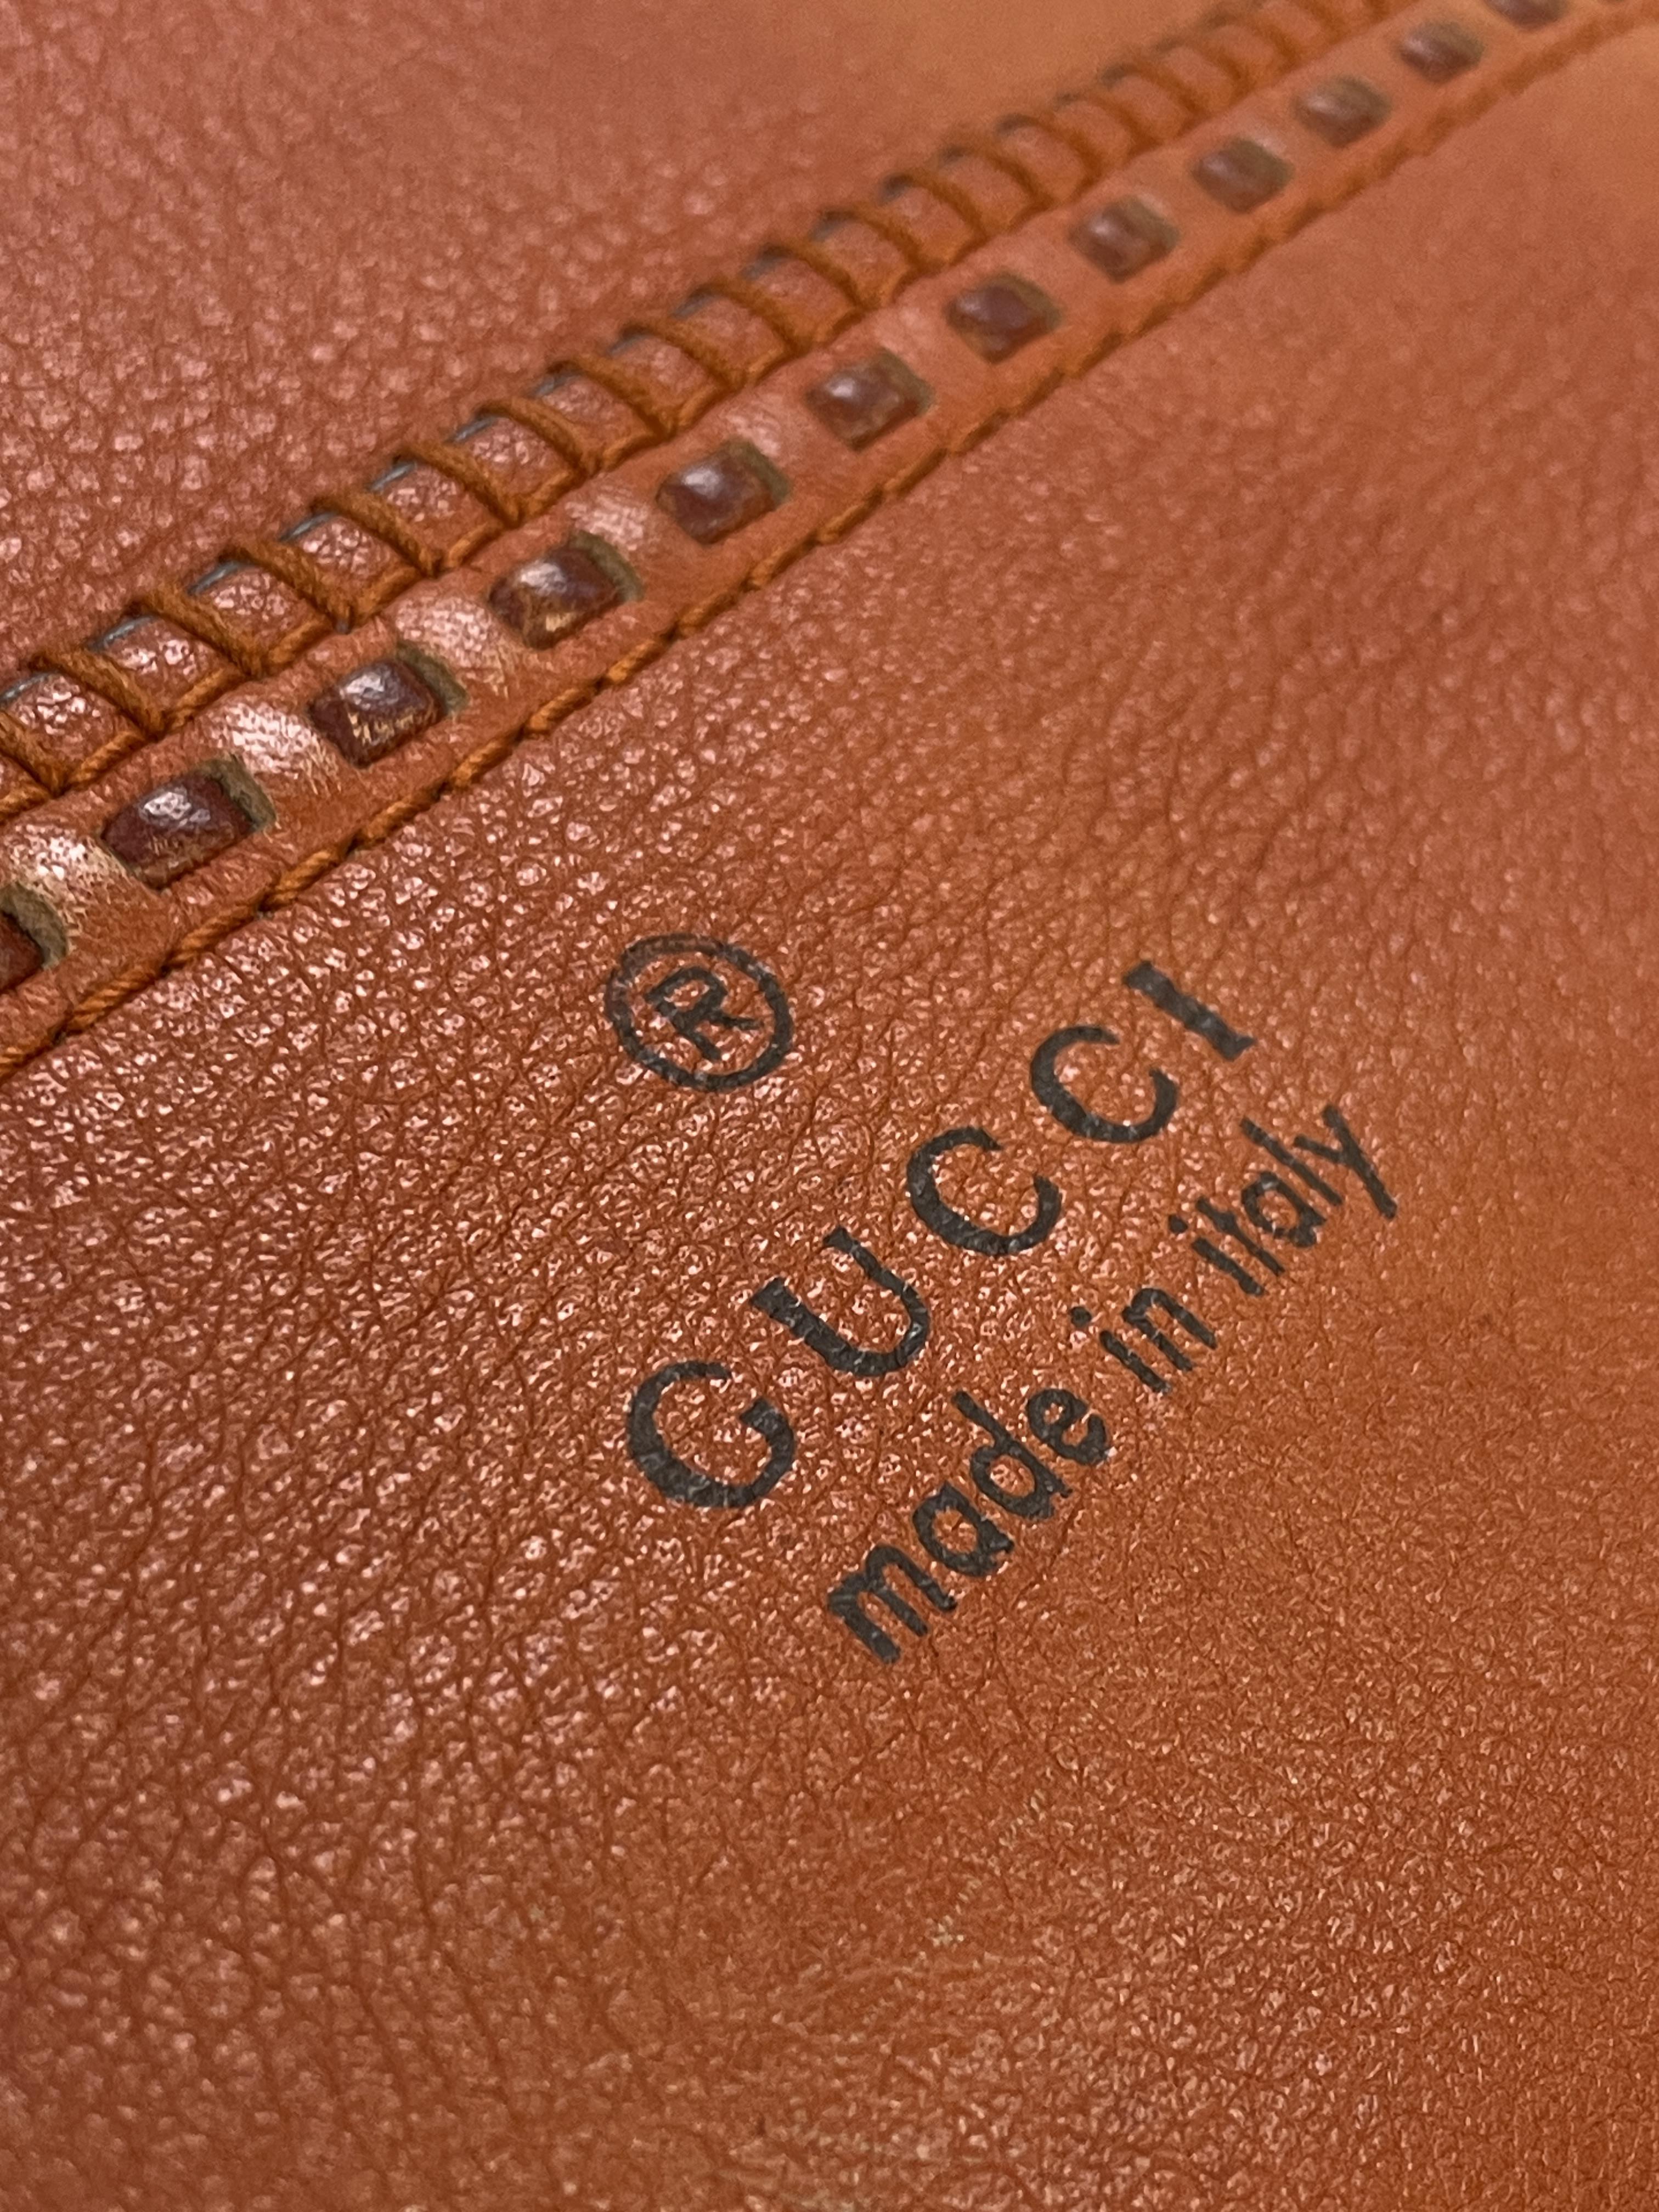 A GUCCI ORANGE LEATHER LAIDBACK CRAFTY TOTE BAG - Image 4 of 12